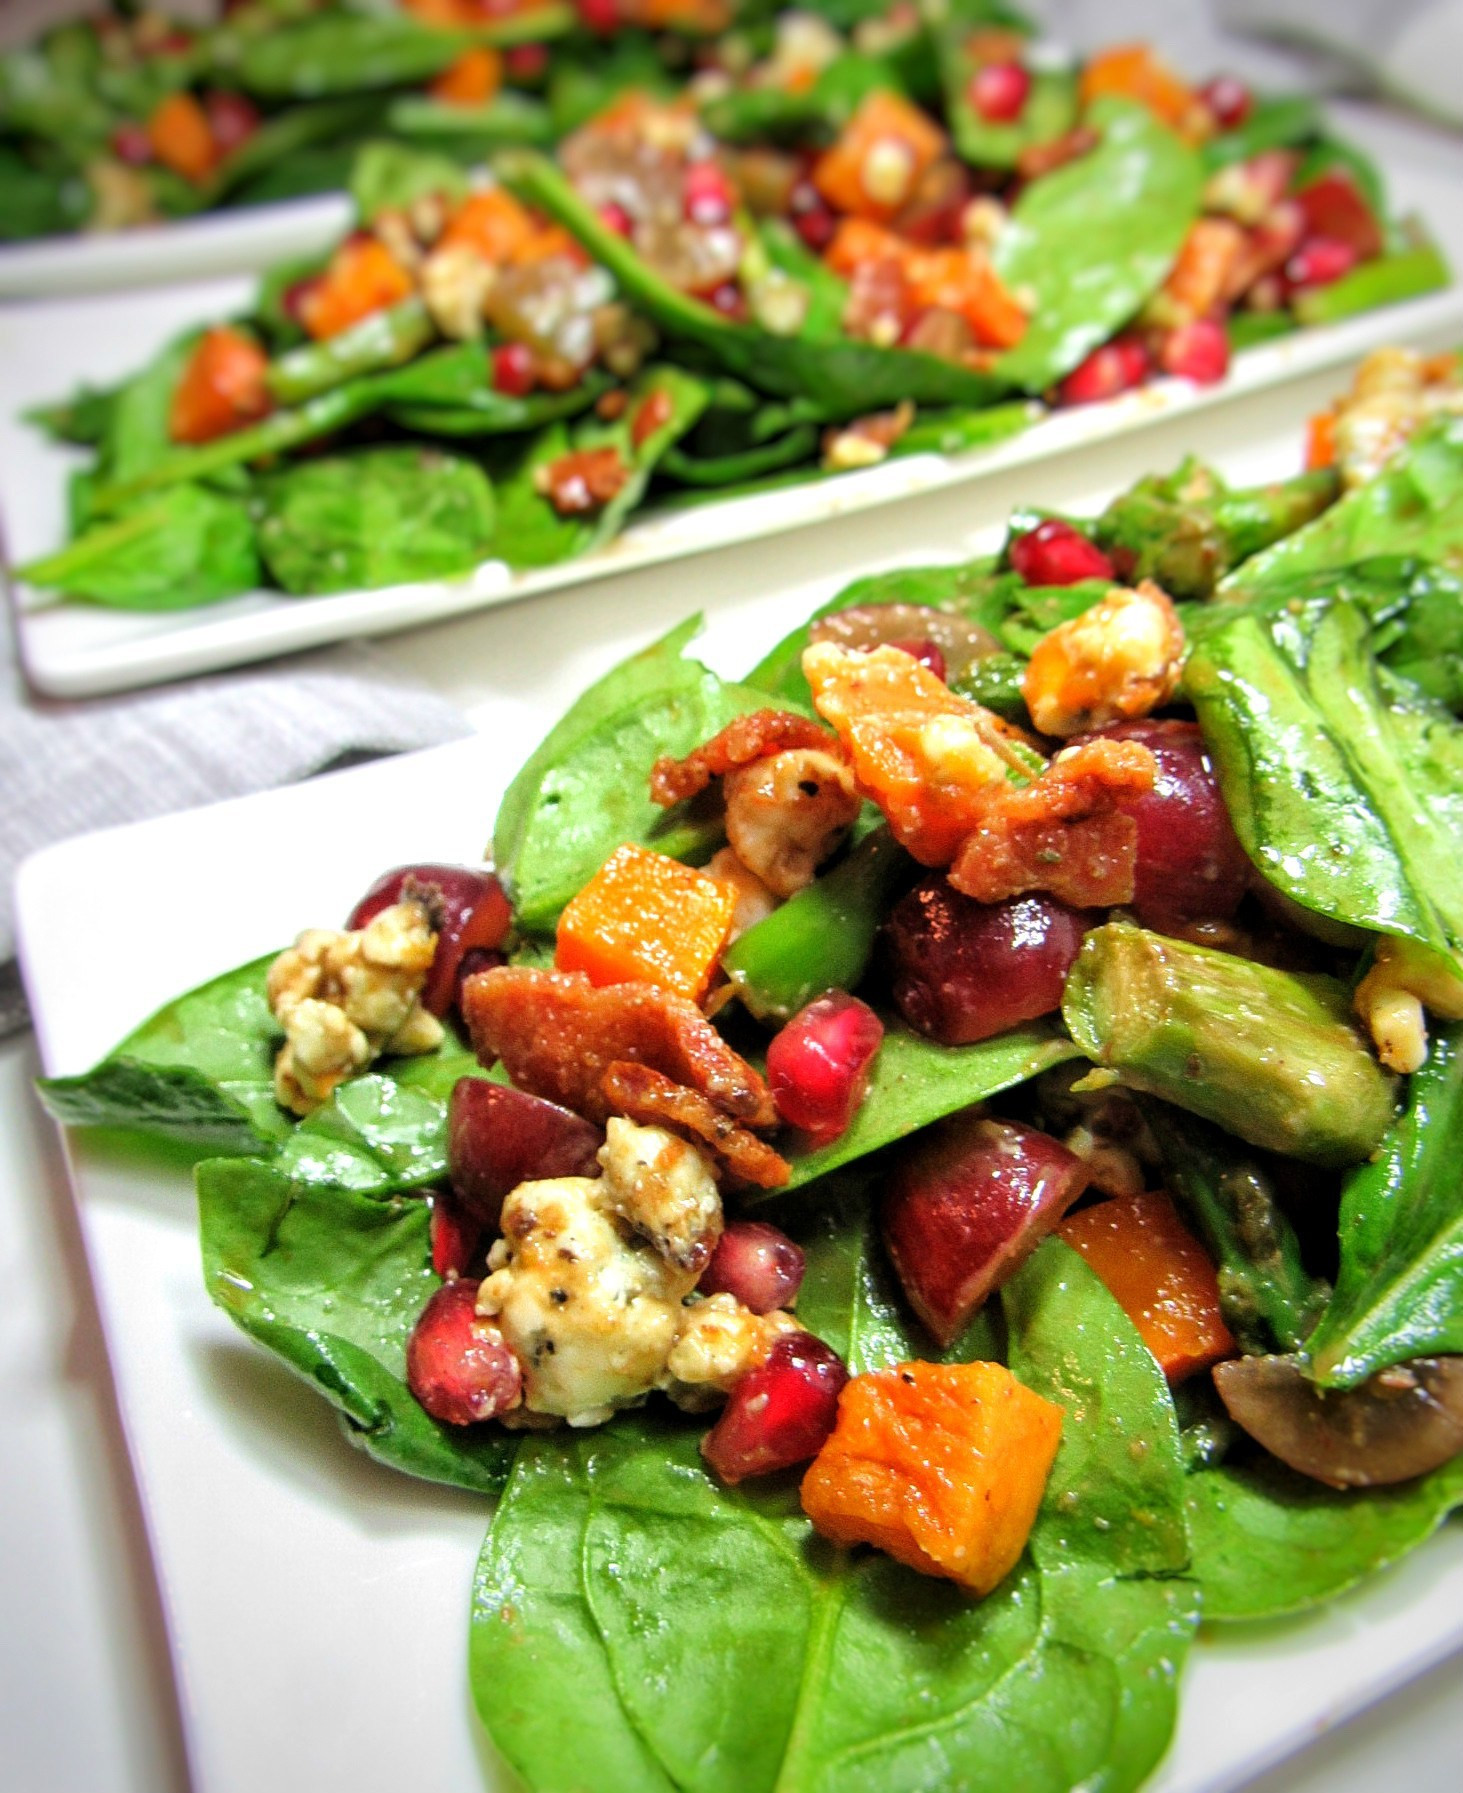 Salad For Thanksgiving Dinner
 Thanksgiving Dinner Salad with Butternut Squash bits and